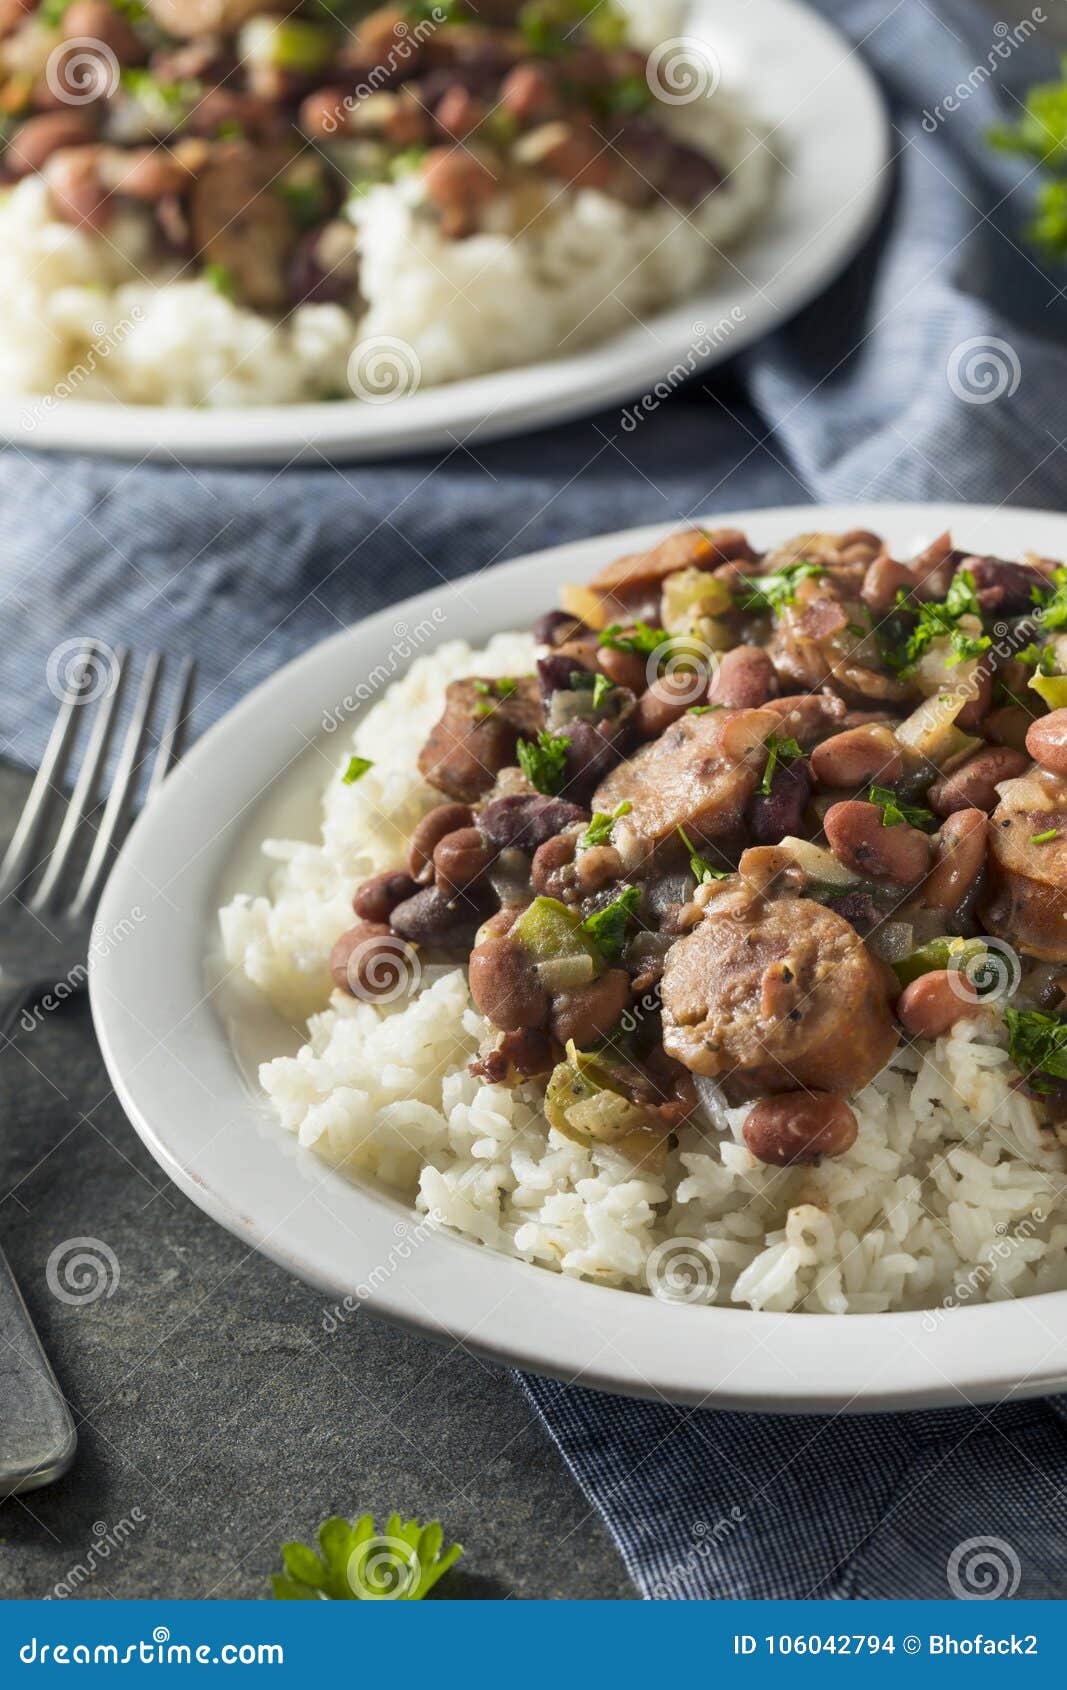 Southern Red Beans and Rice Stock Photo - Image of rice, parsley: 106042794